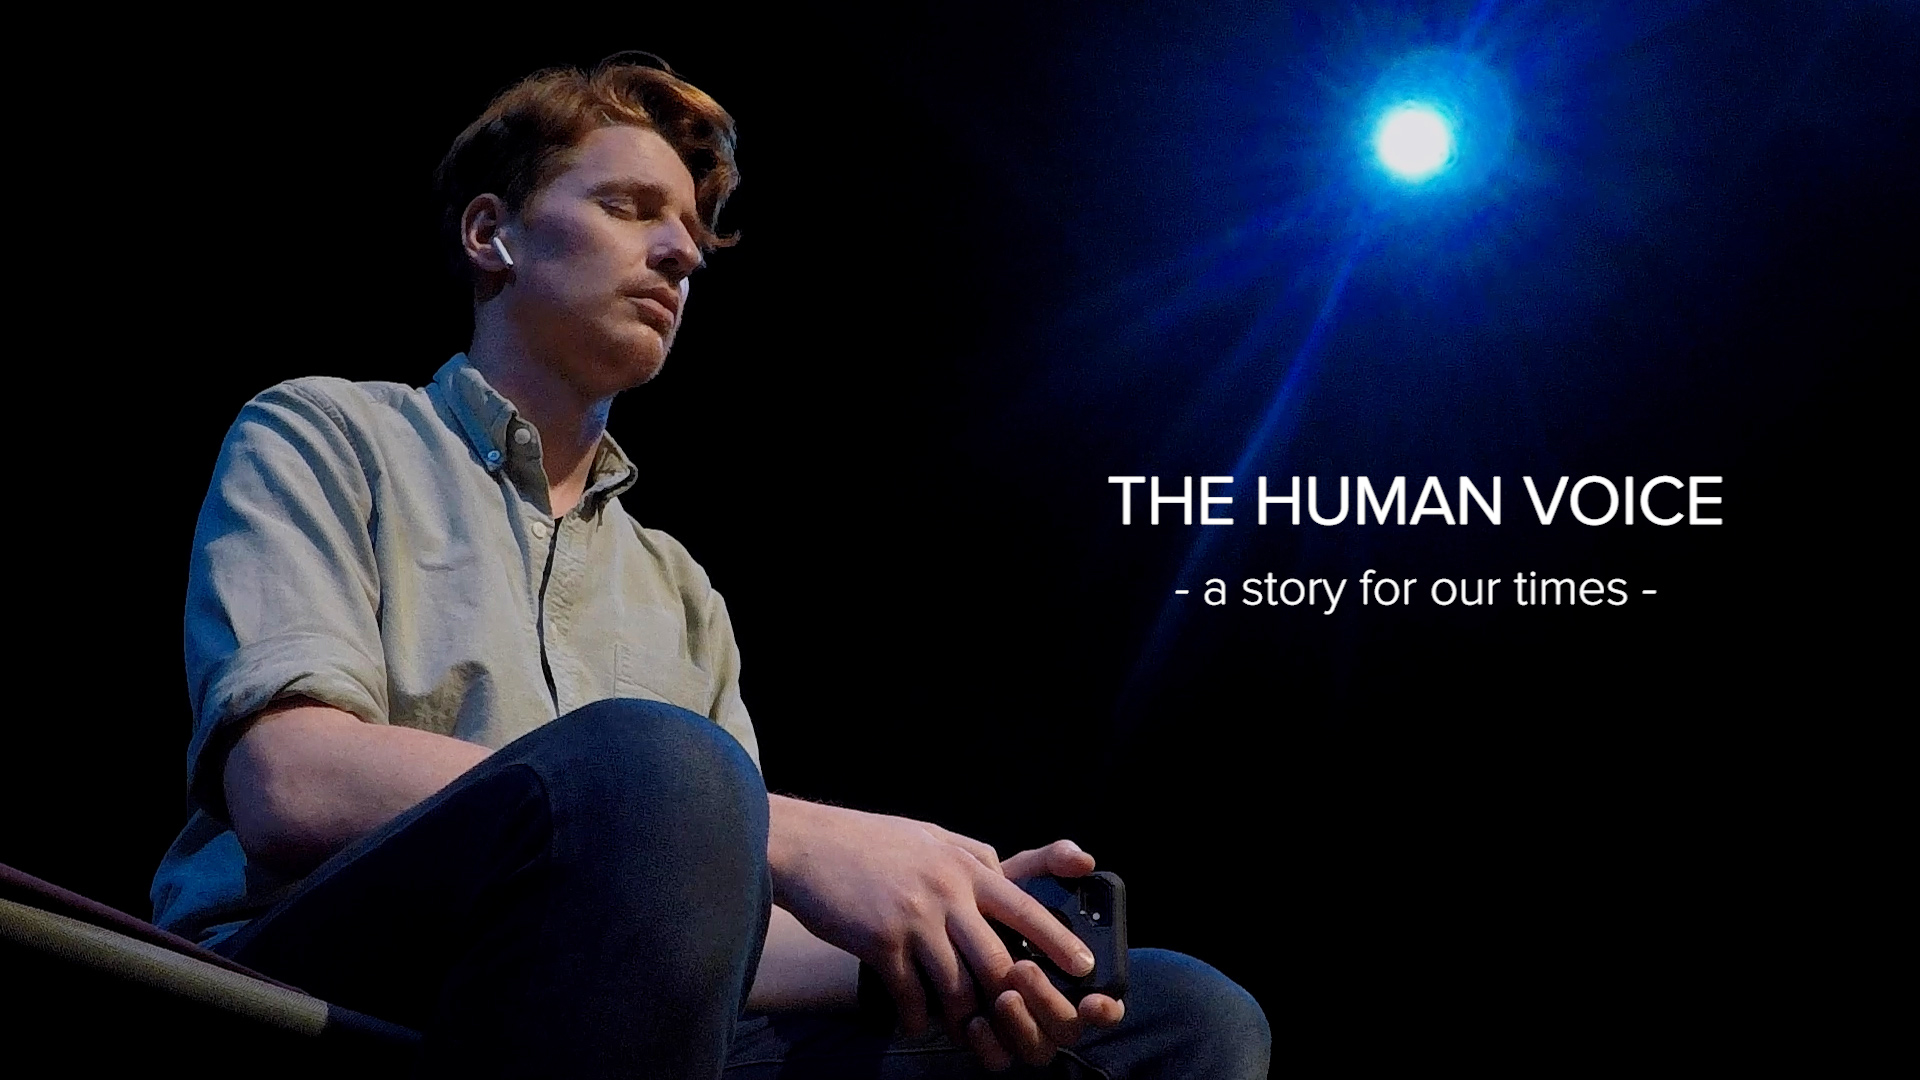 City Opera Vancouver’s “The Human Voice” streamed in nightly webisodes